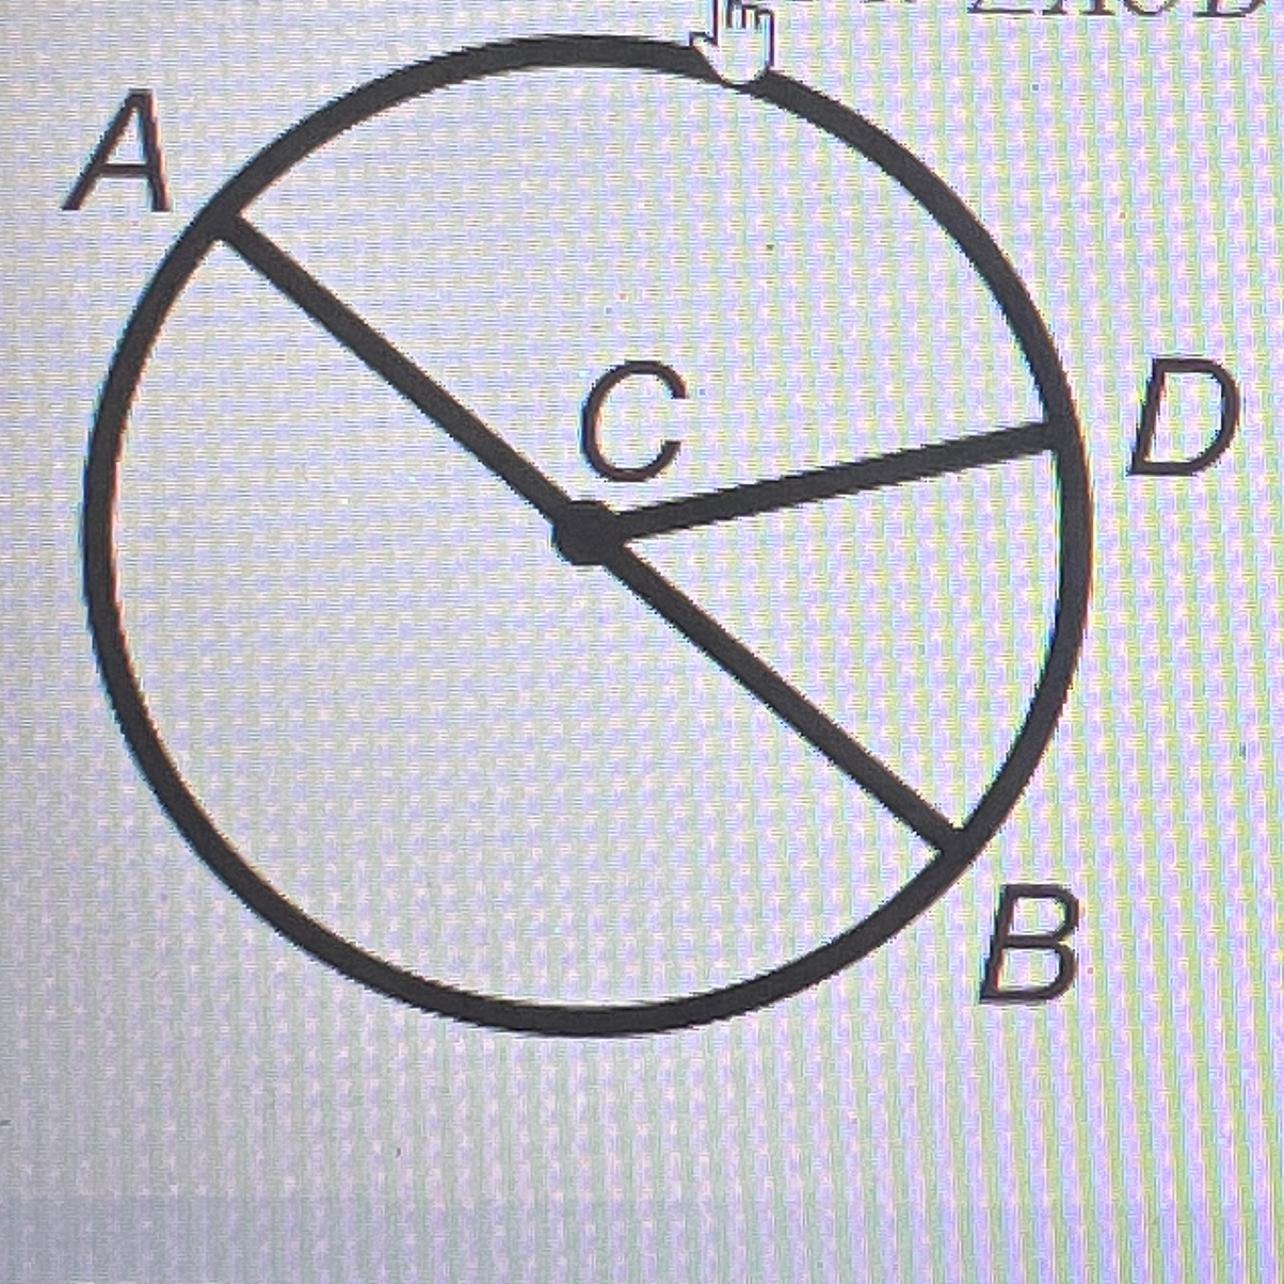 Given The Image, If AB Is A Semicircle And DB = 70 Degrees, What Is The Measure Of ACD? 